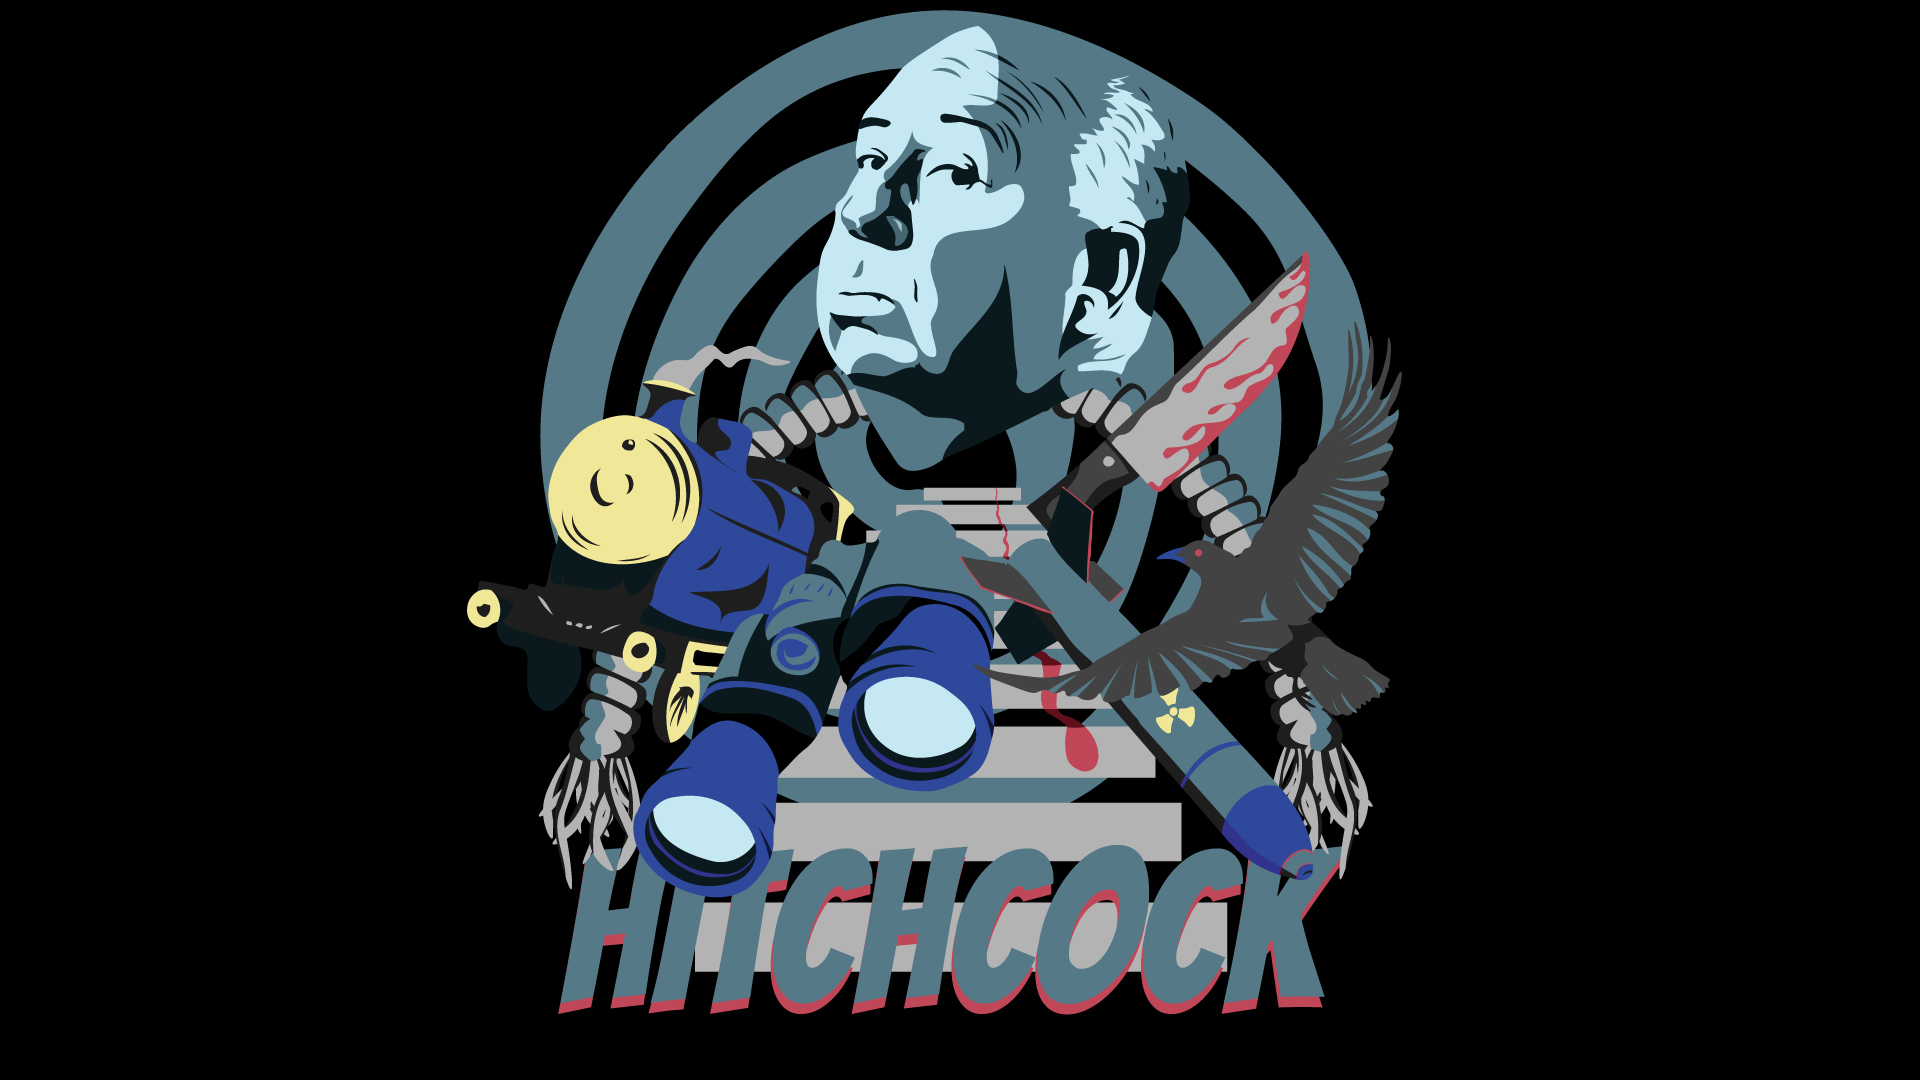 Hitchcock Wallpapers